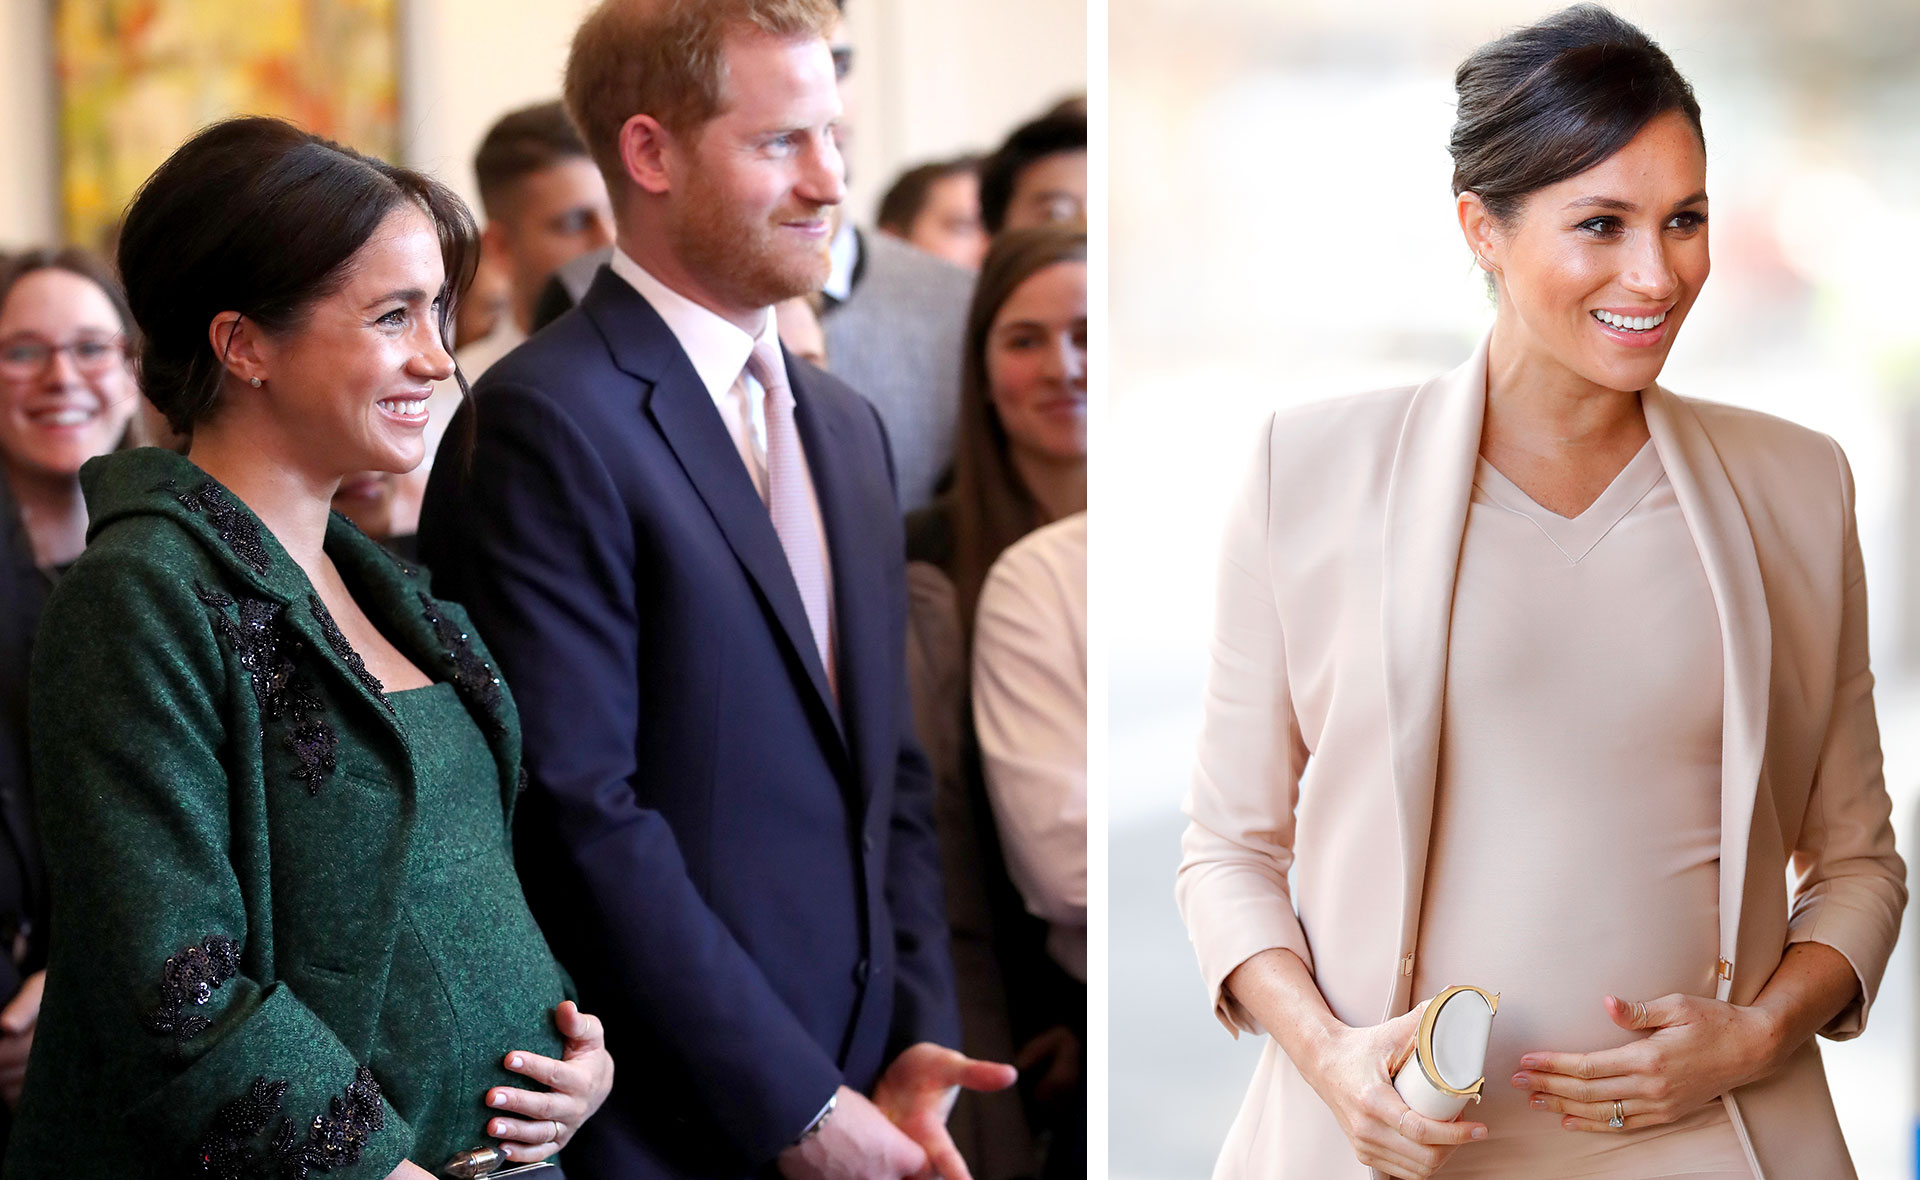 A right royal bundle! When is Meghan Markle’s second baby due?